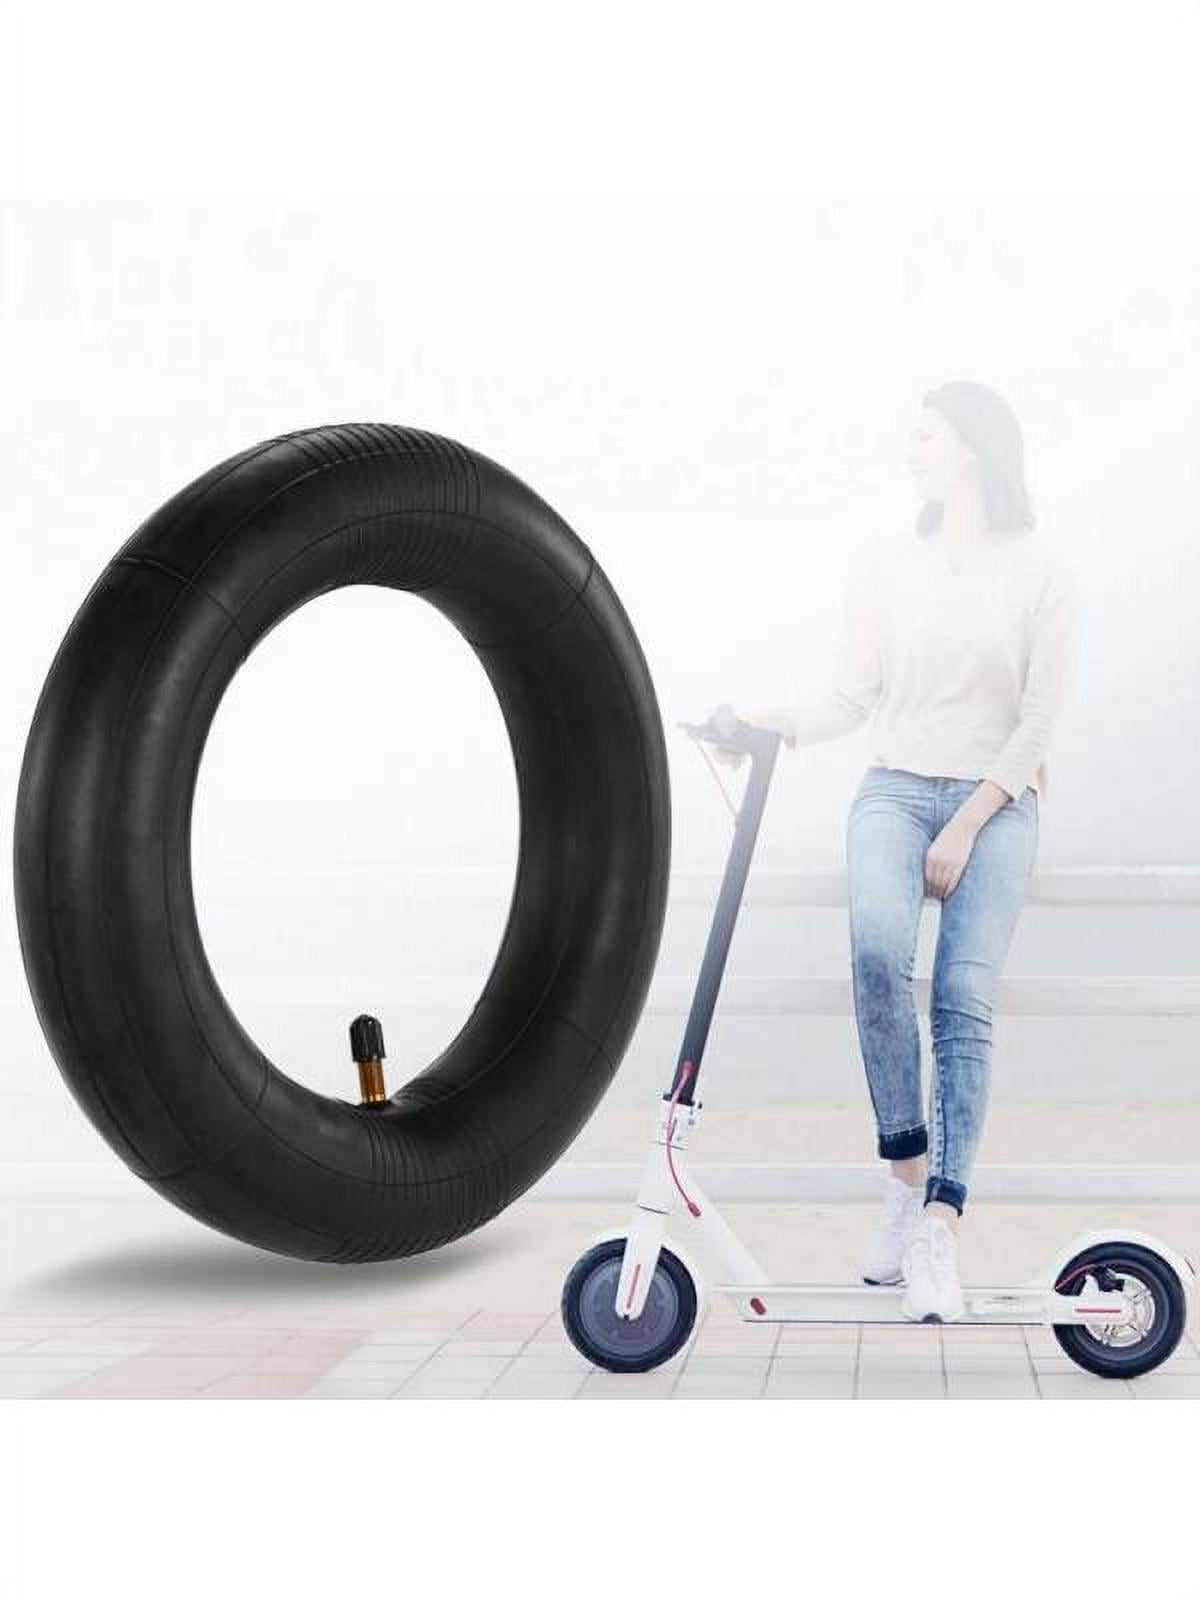 Scooter Replacement Inner Outer Tube Tire 8.5 For Xiaomi Mijia M365 Bird 